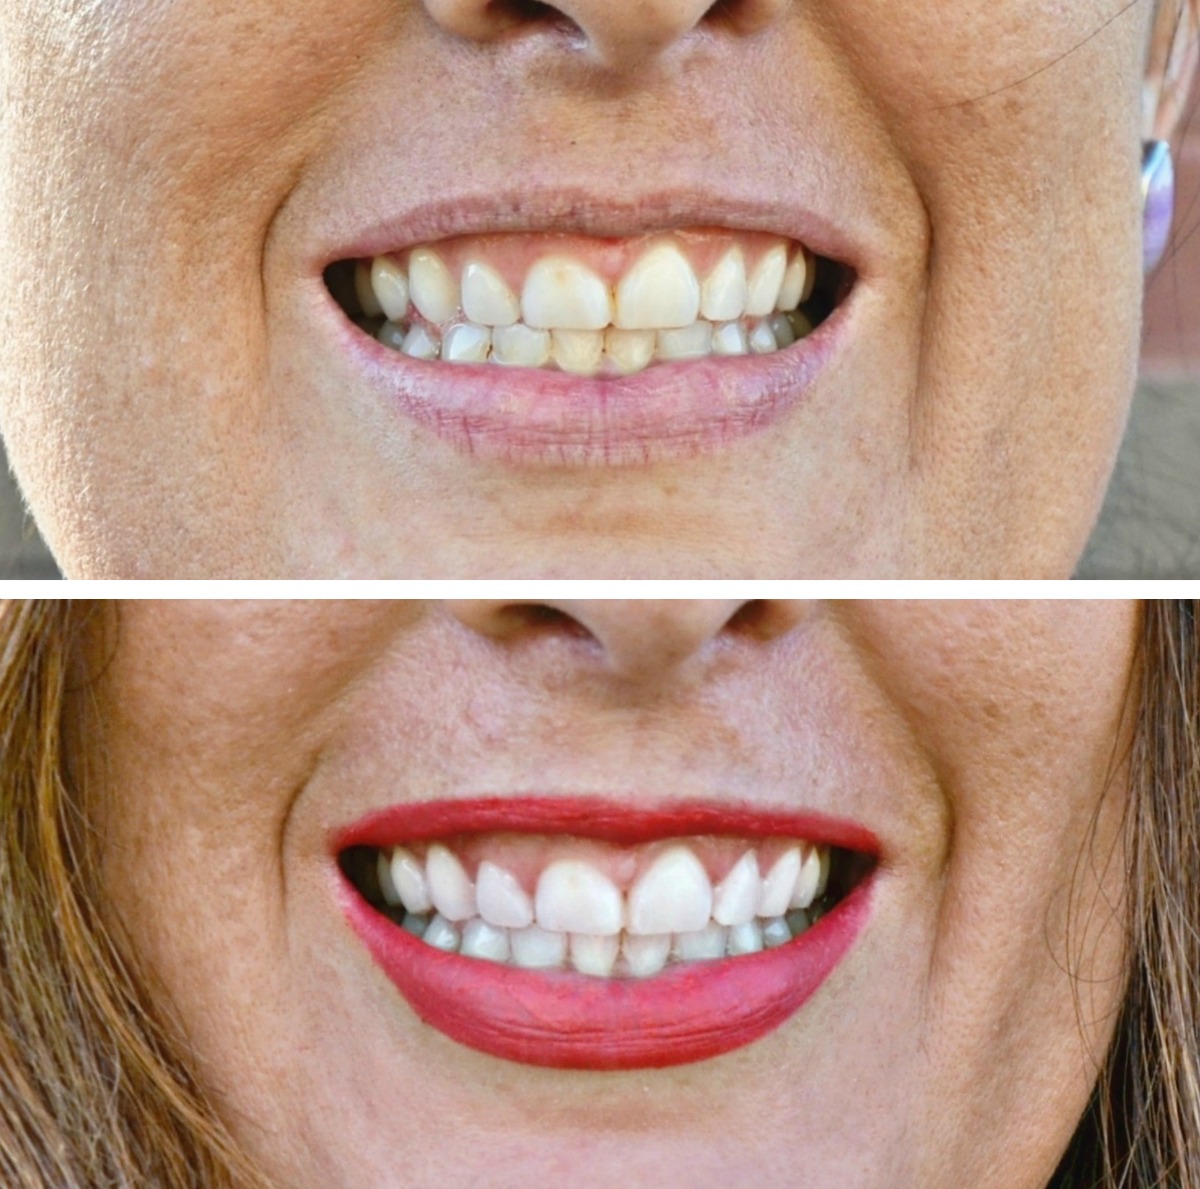 The Smile Brilliant teeth whitening at home kit makes a quick visible difference.